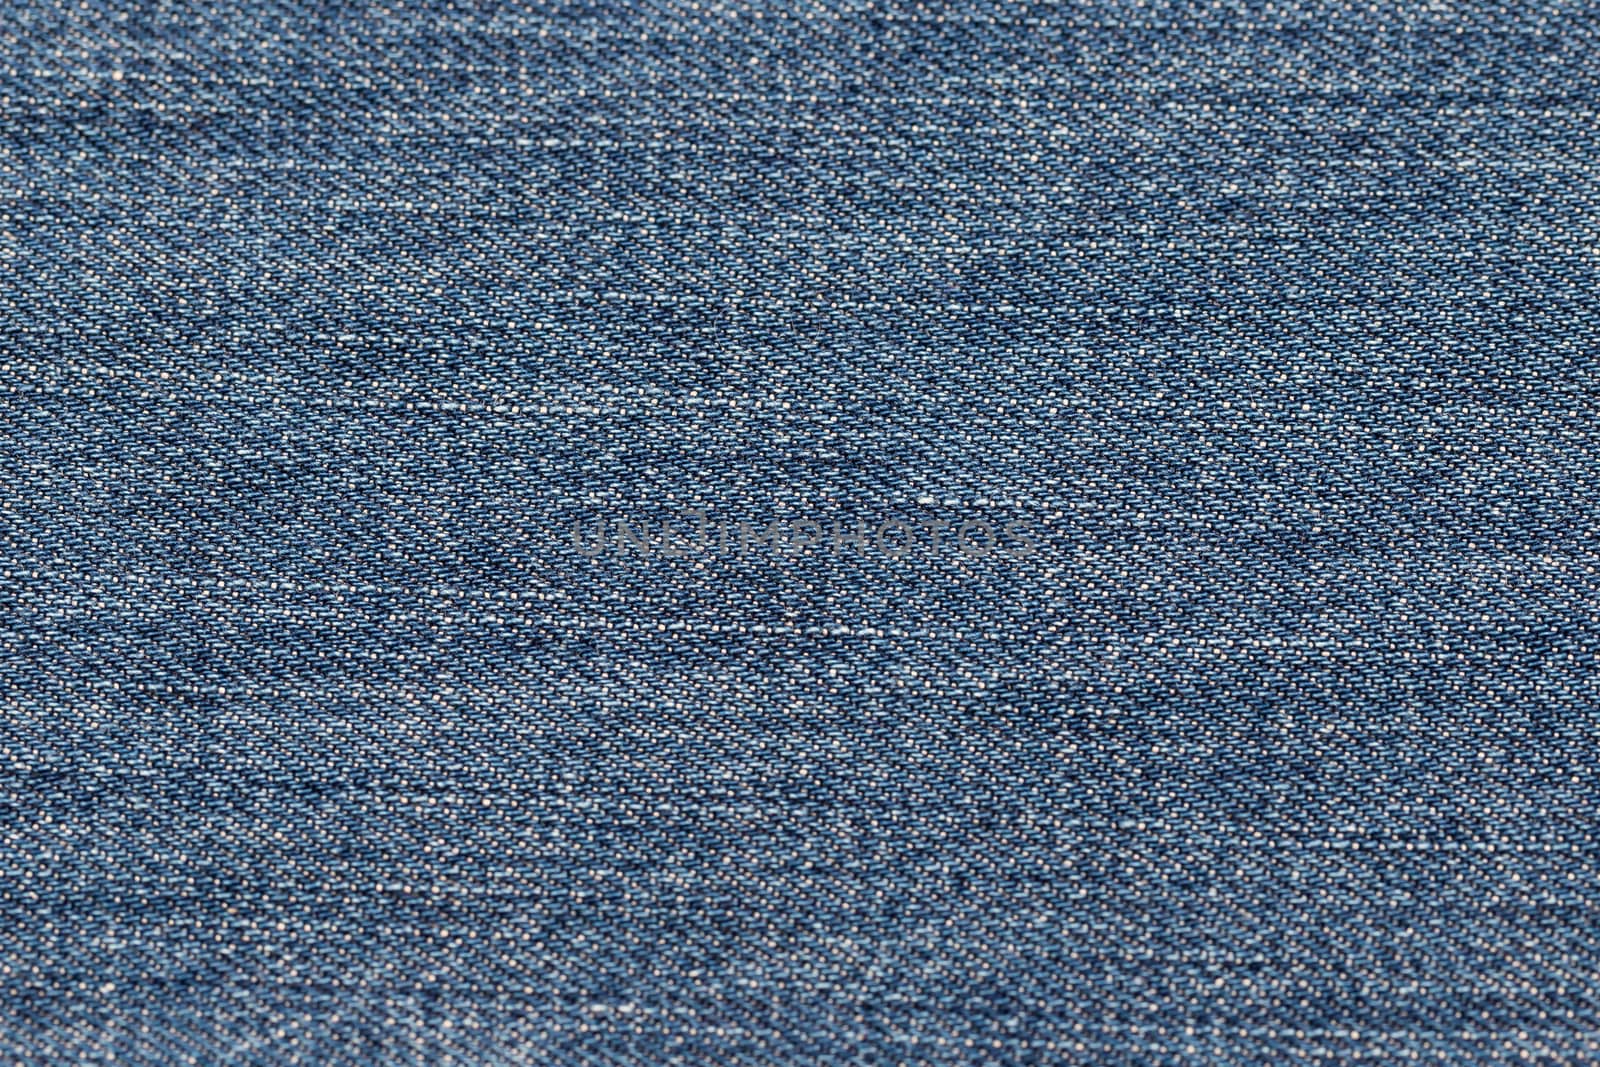 Close-up of blue denim texture. Denim jeans background, space to copy your design or text.